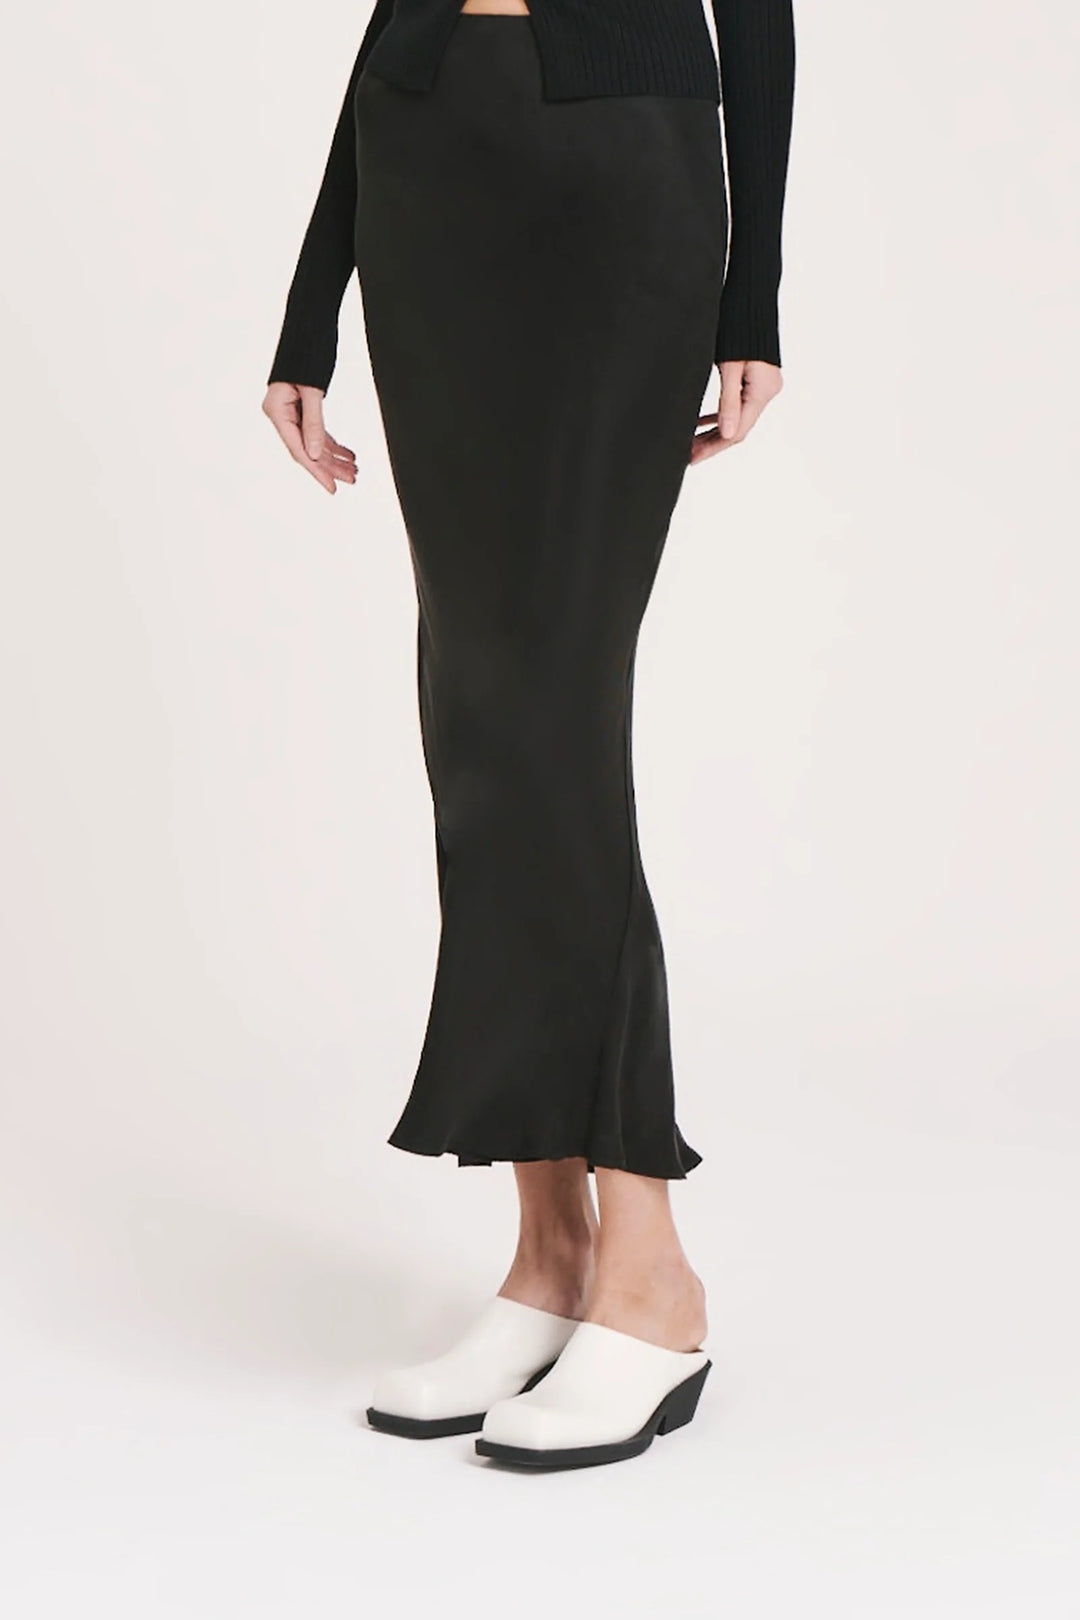 Nude Lucy Ines Cupro Skirt - Black - JL & CO. boutique 